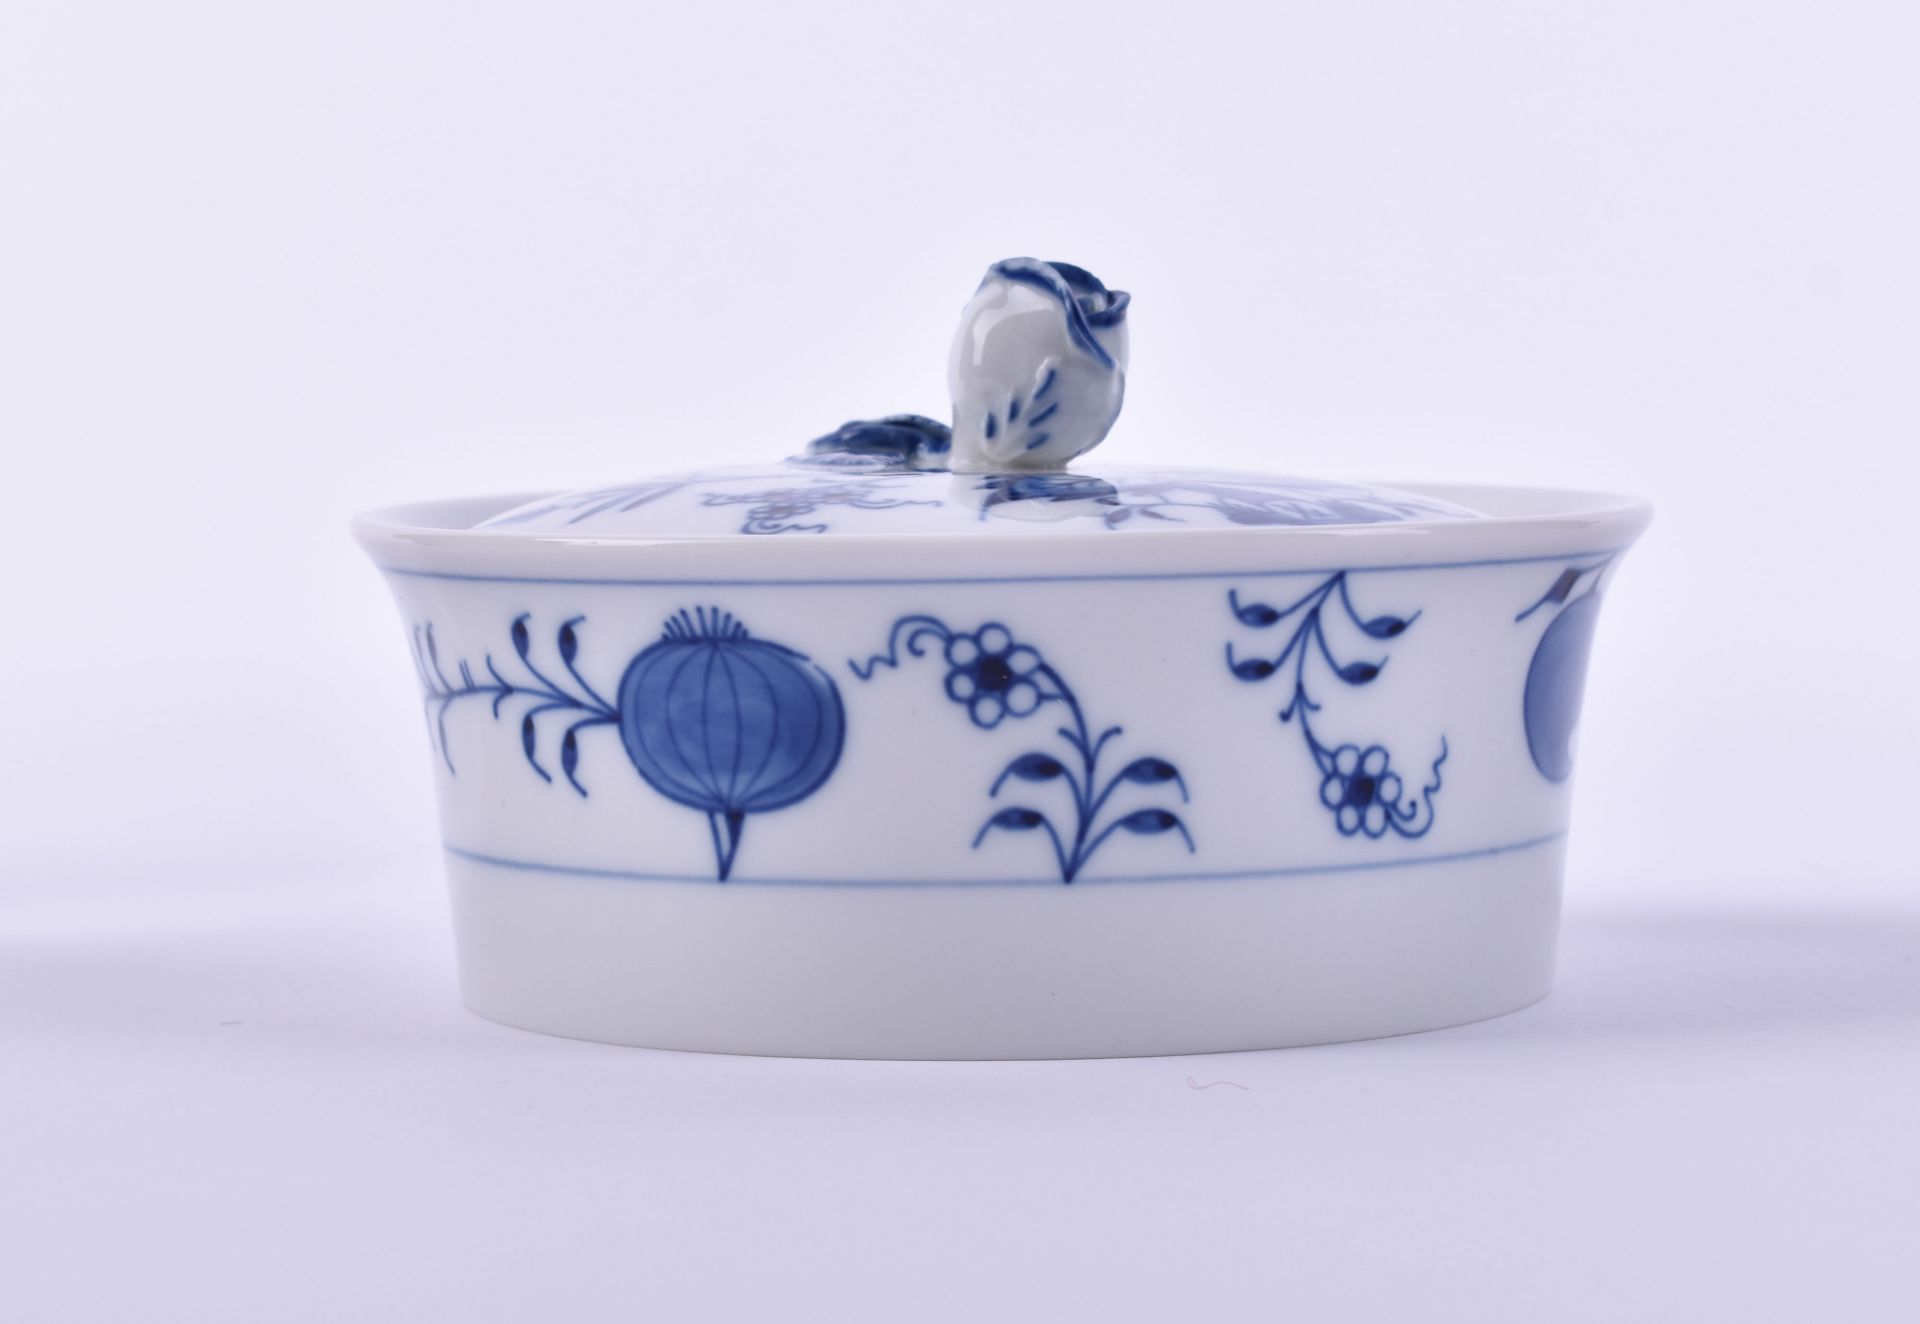  Butter dish Meissen  - Image 3 of 6